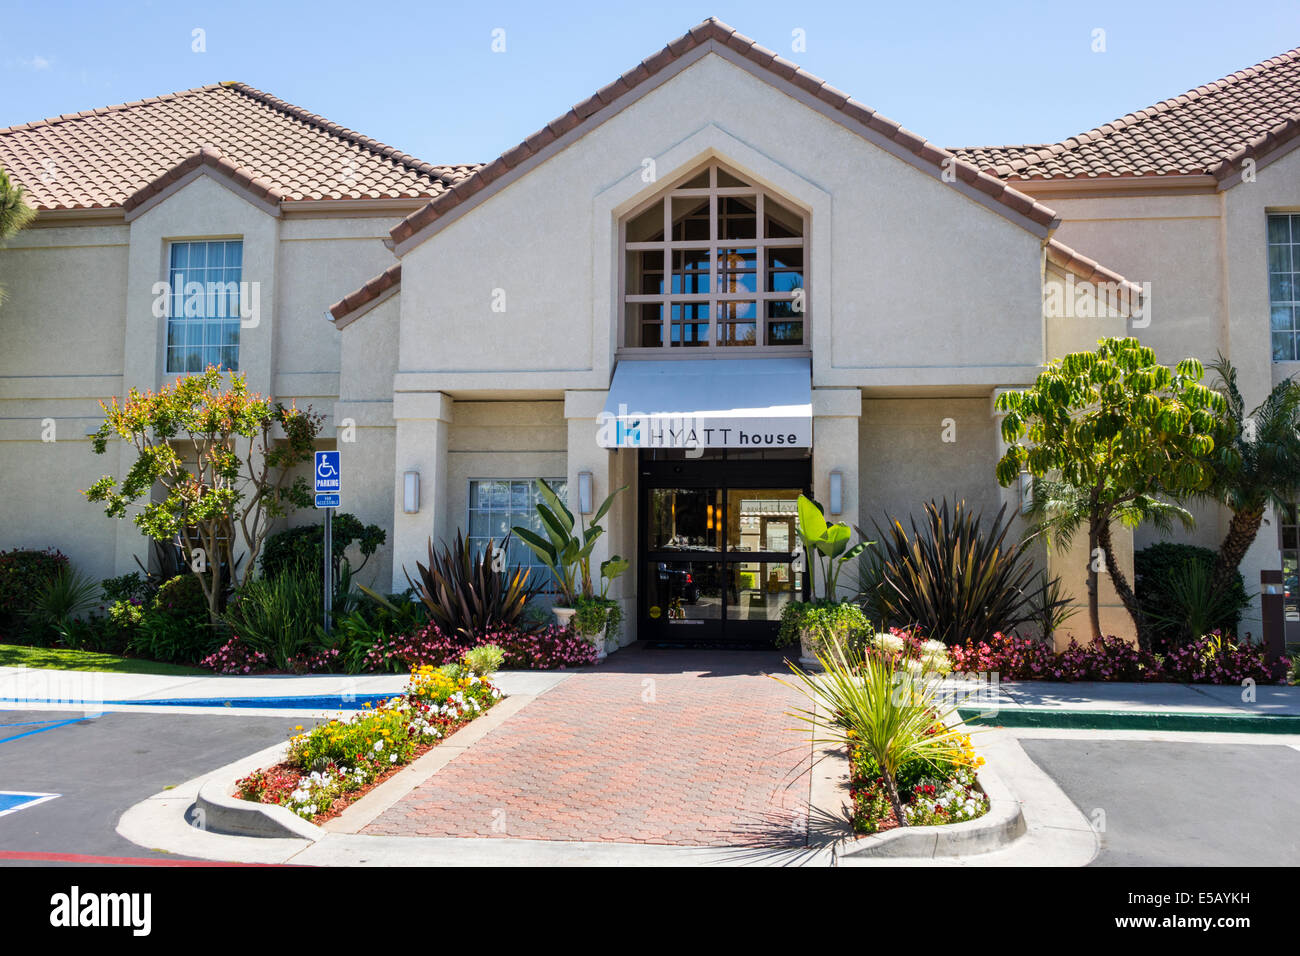 Los Angeles California,Manhattan Beach,Hyatt House,extended stay,hotel,chain,lodging,exterior,sign,signs,logo,entrance,awning,landscaping,disabled par Stock Photo